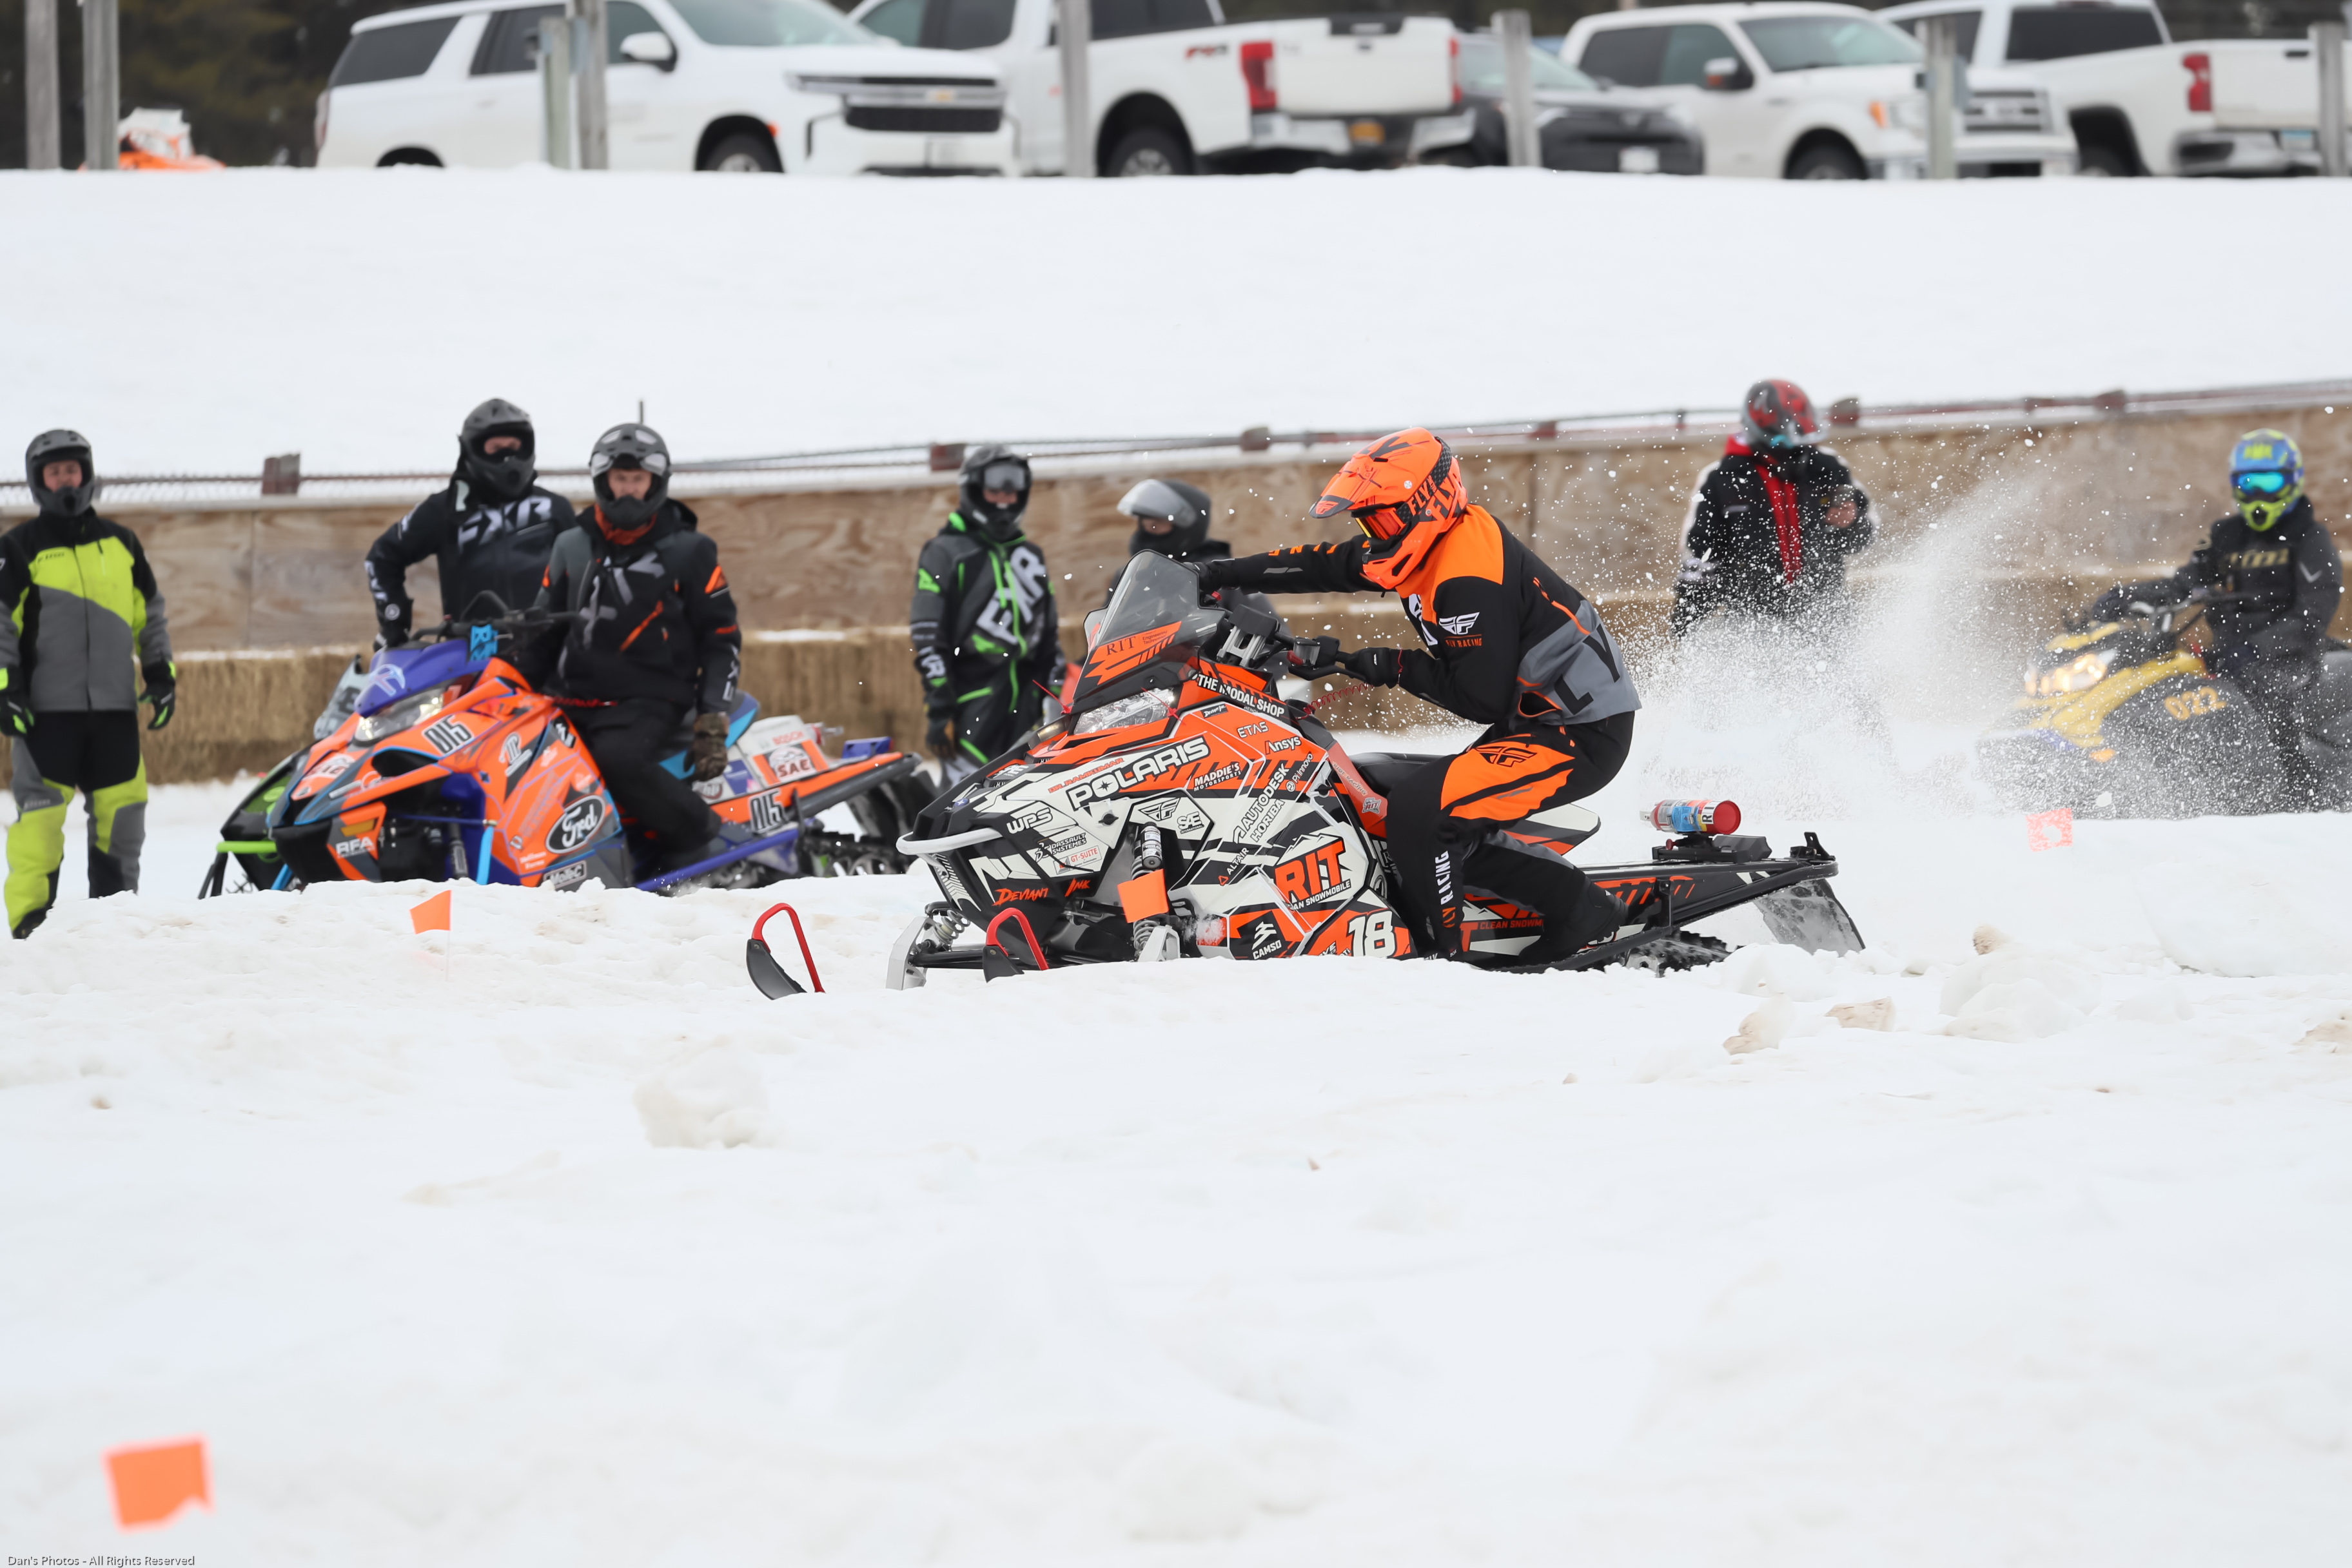 Snowmobile racing in competition